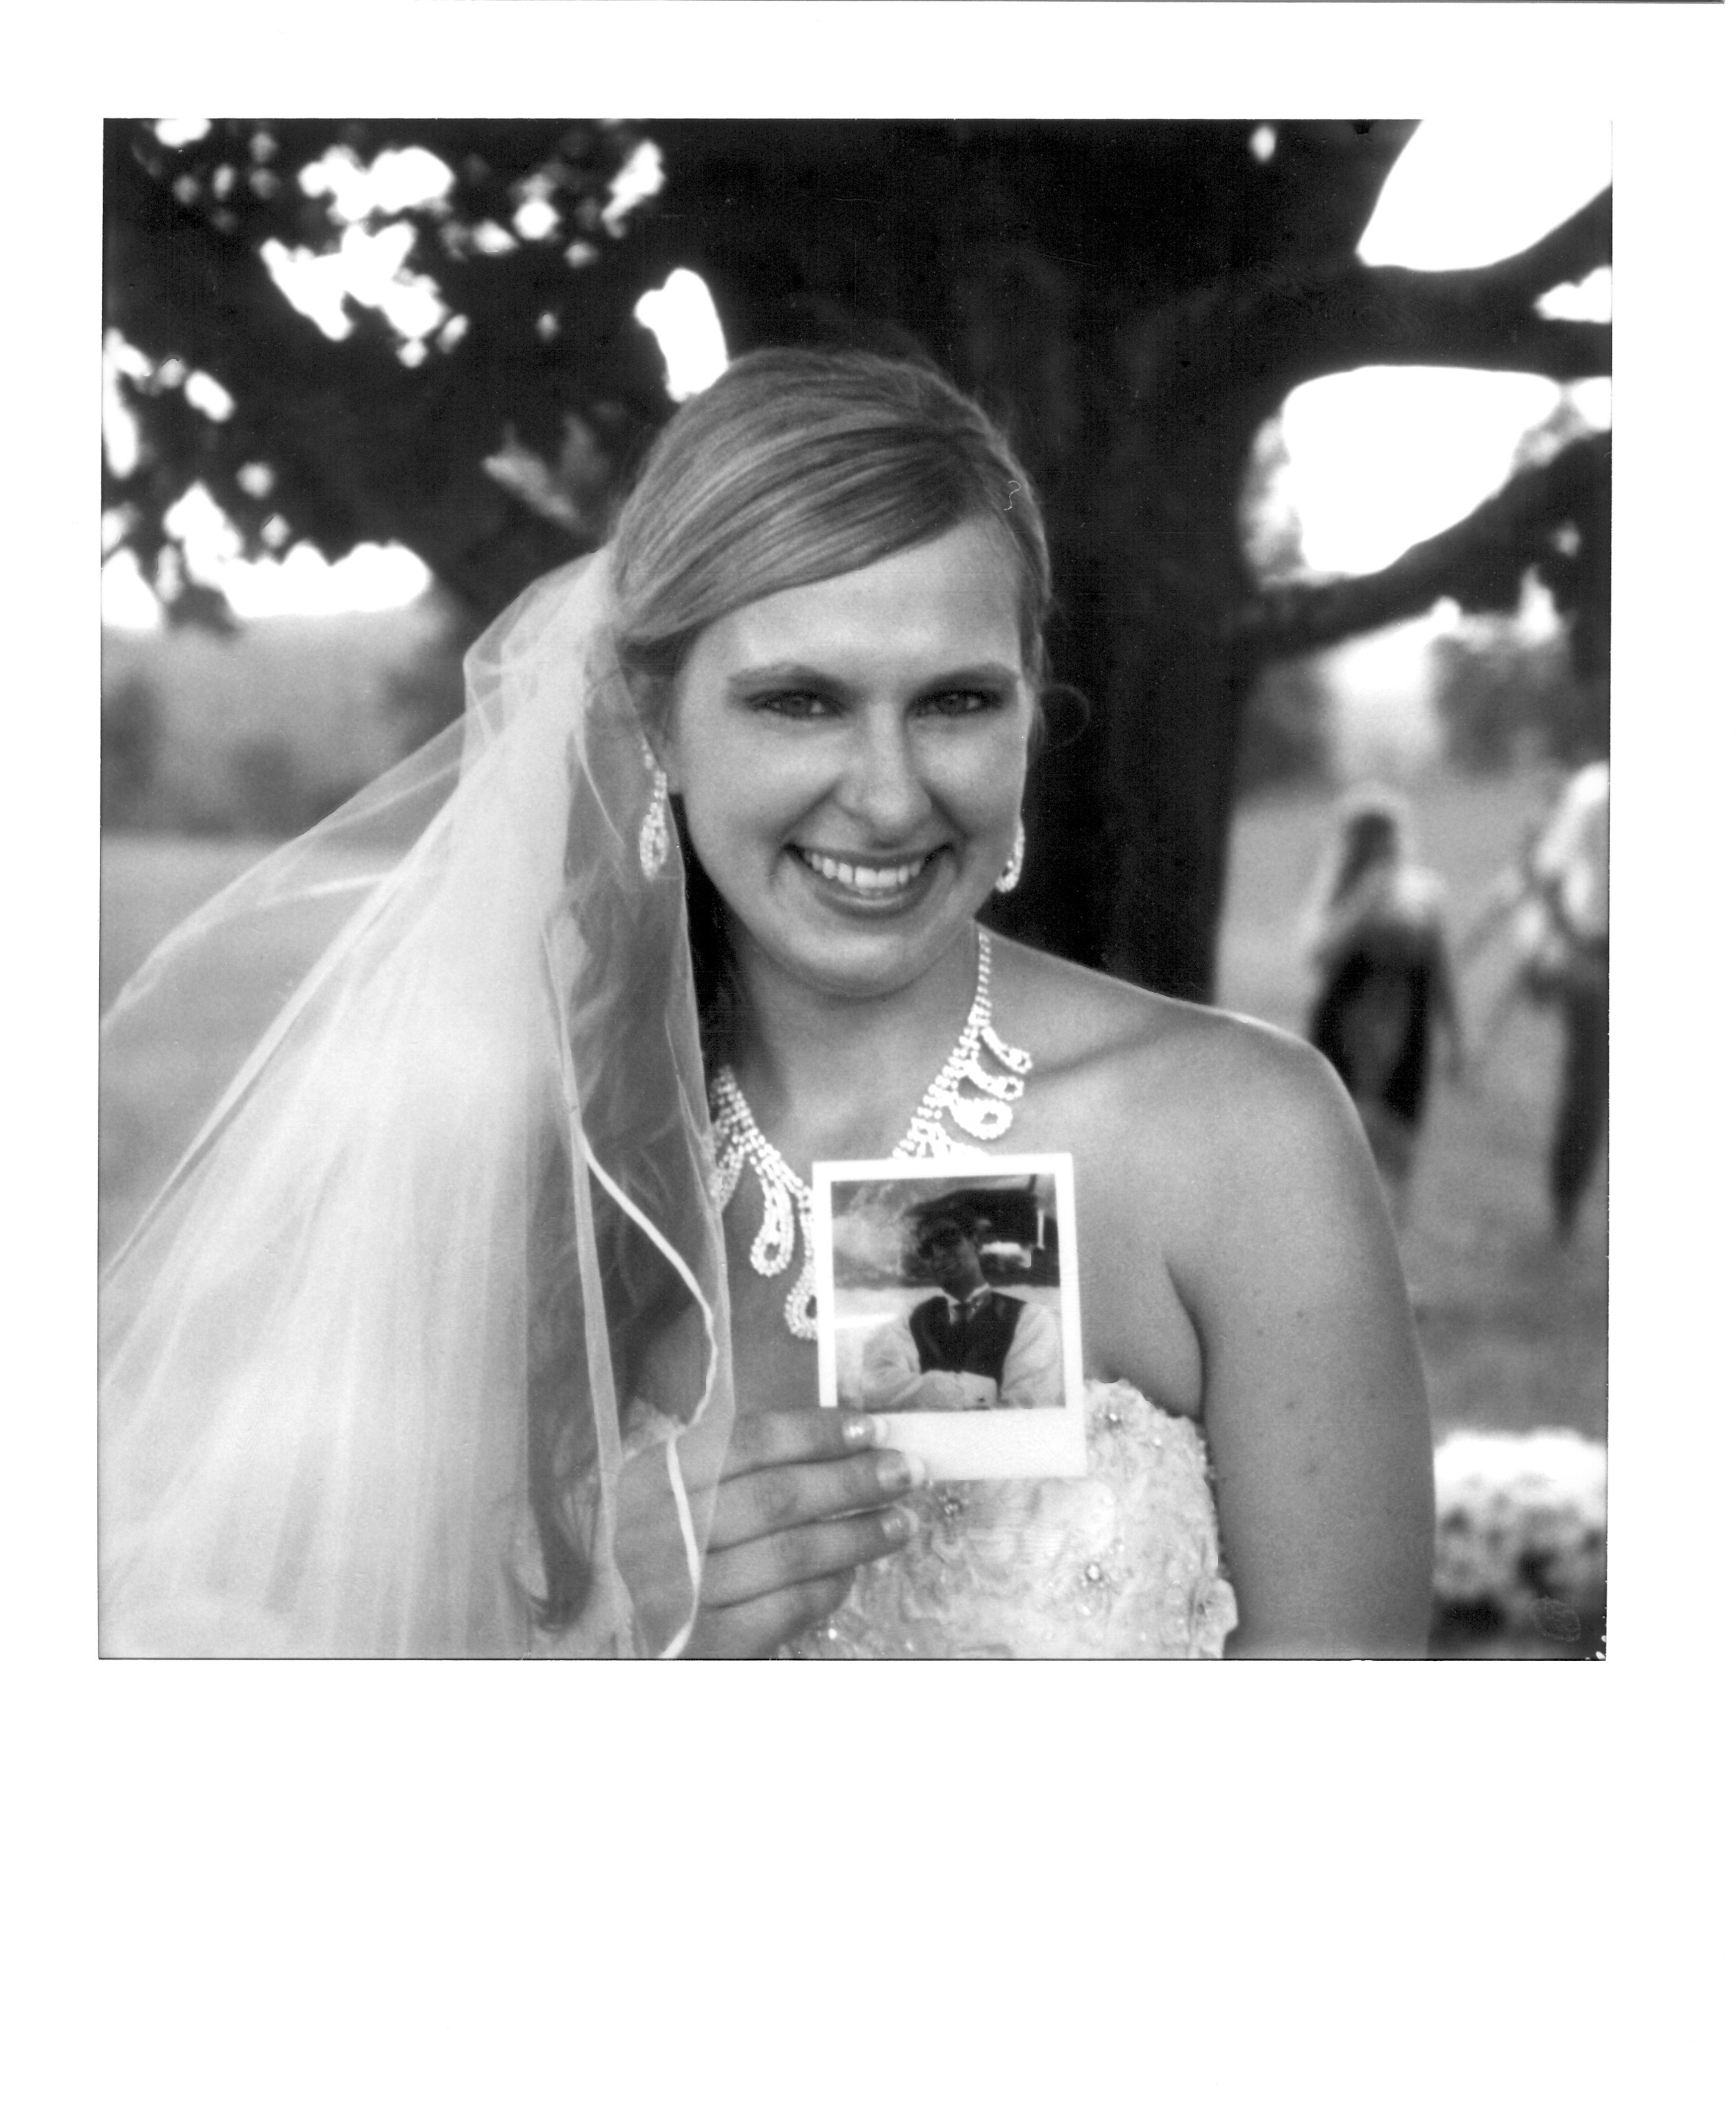 Amy and her Polaroid